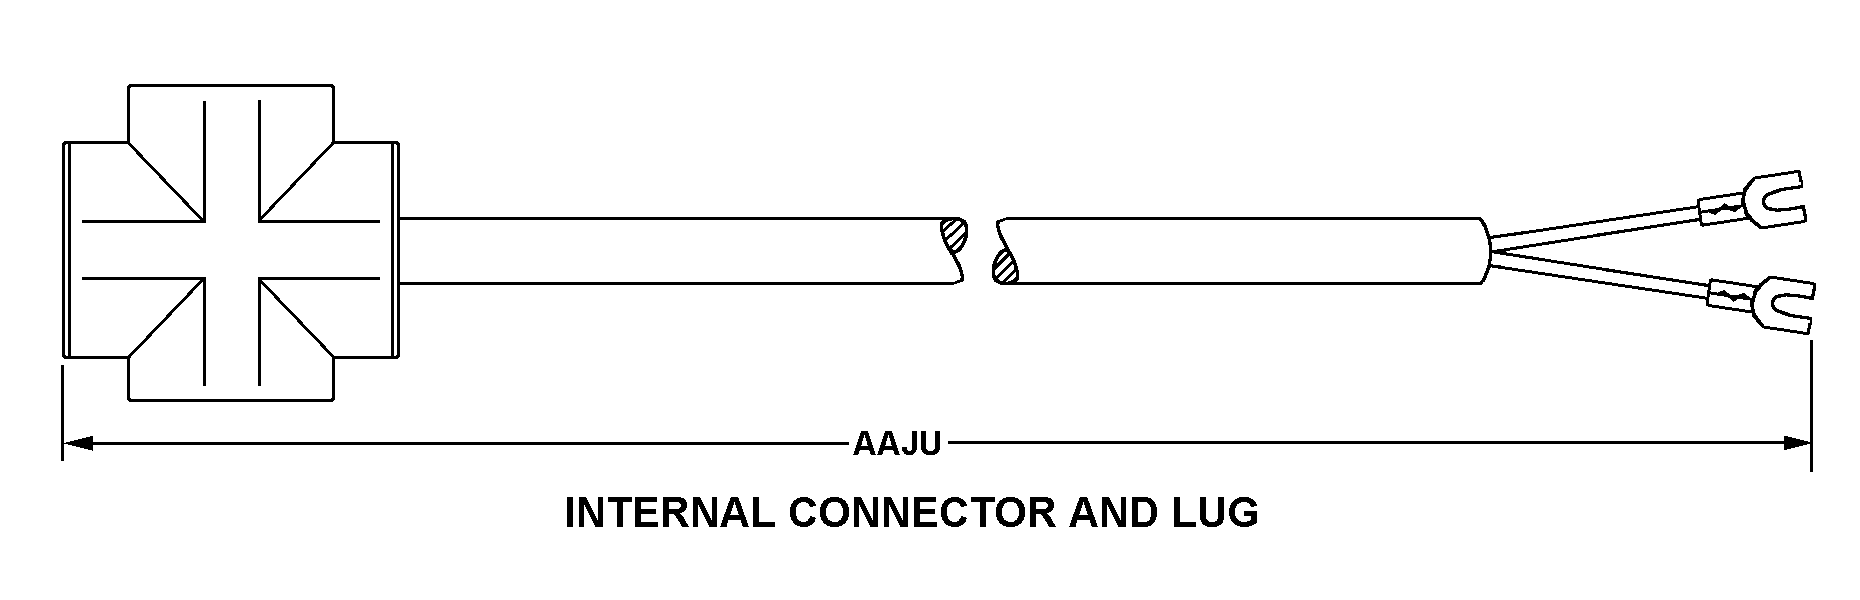 INTERNAL CONNECTOR AND LUG style nsn 5995-01-029-1112